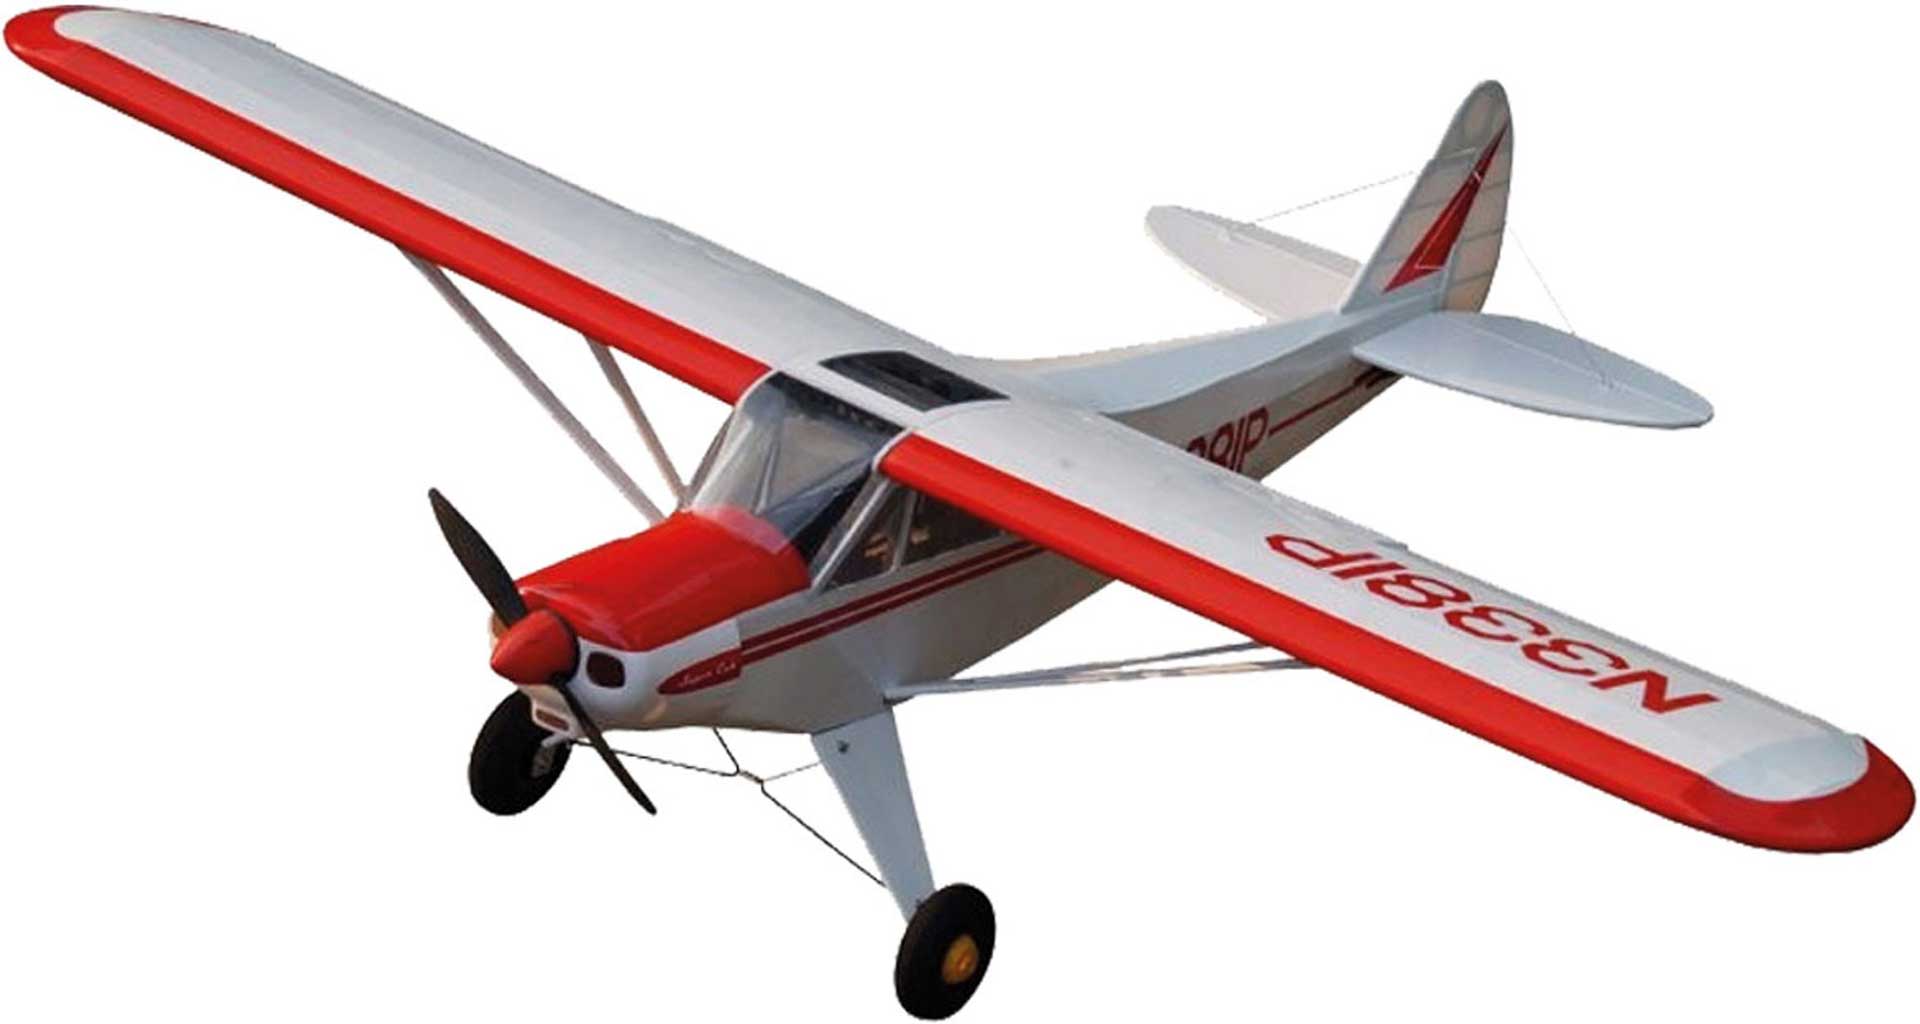 VQ Models PIPER PA-18 SUPER CUB ARF 1,6M IN HOLZBAUWEISE